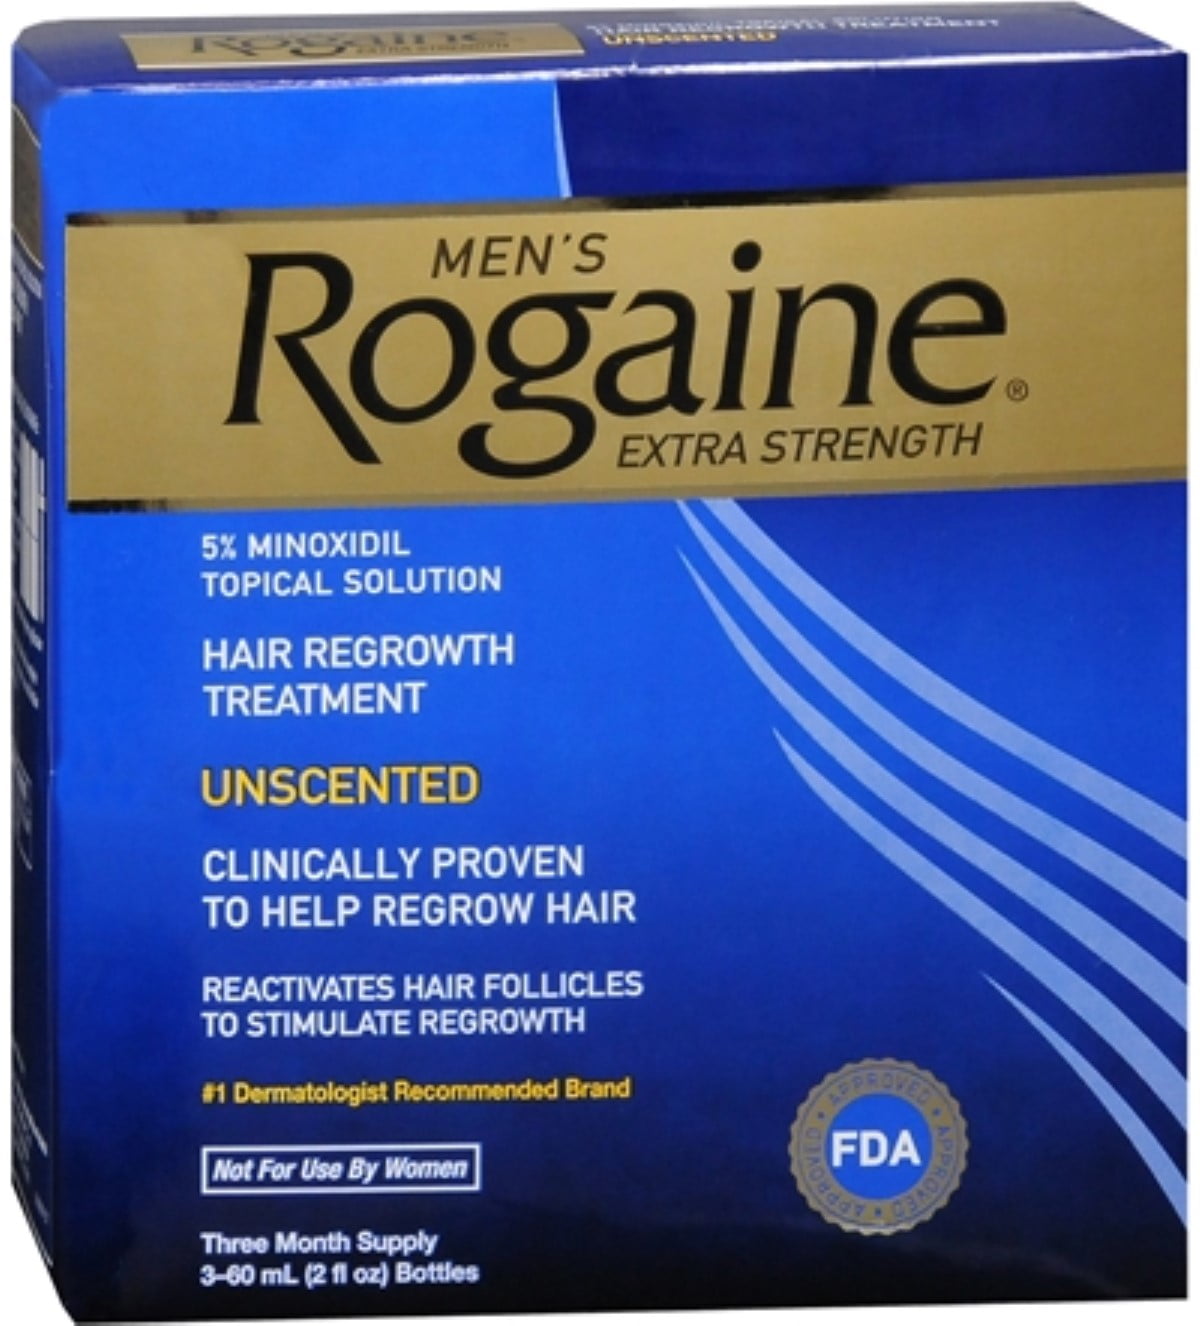 Rogaine Men's Extra Strength Unscented, 6 oz (Pack of 2)